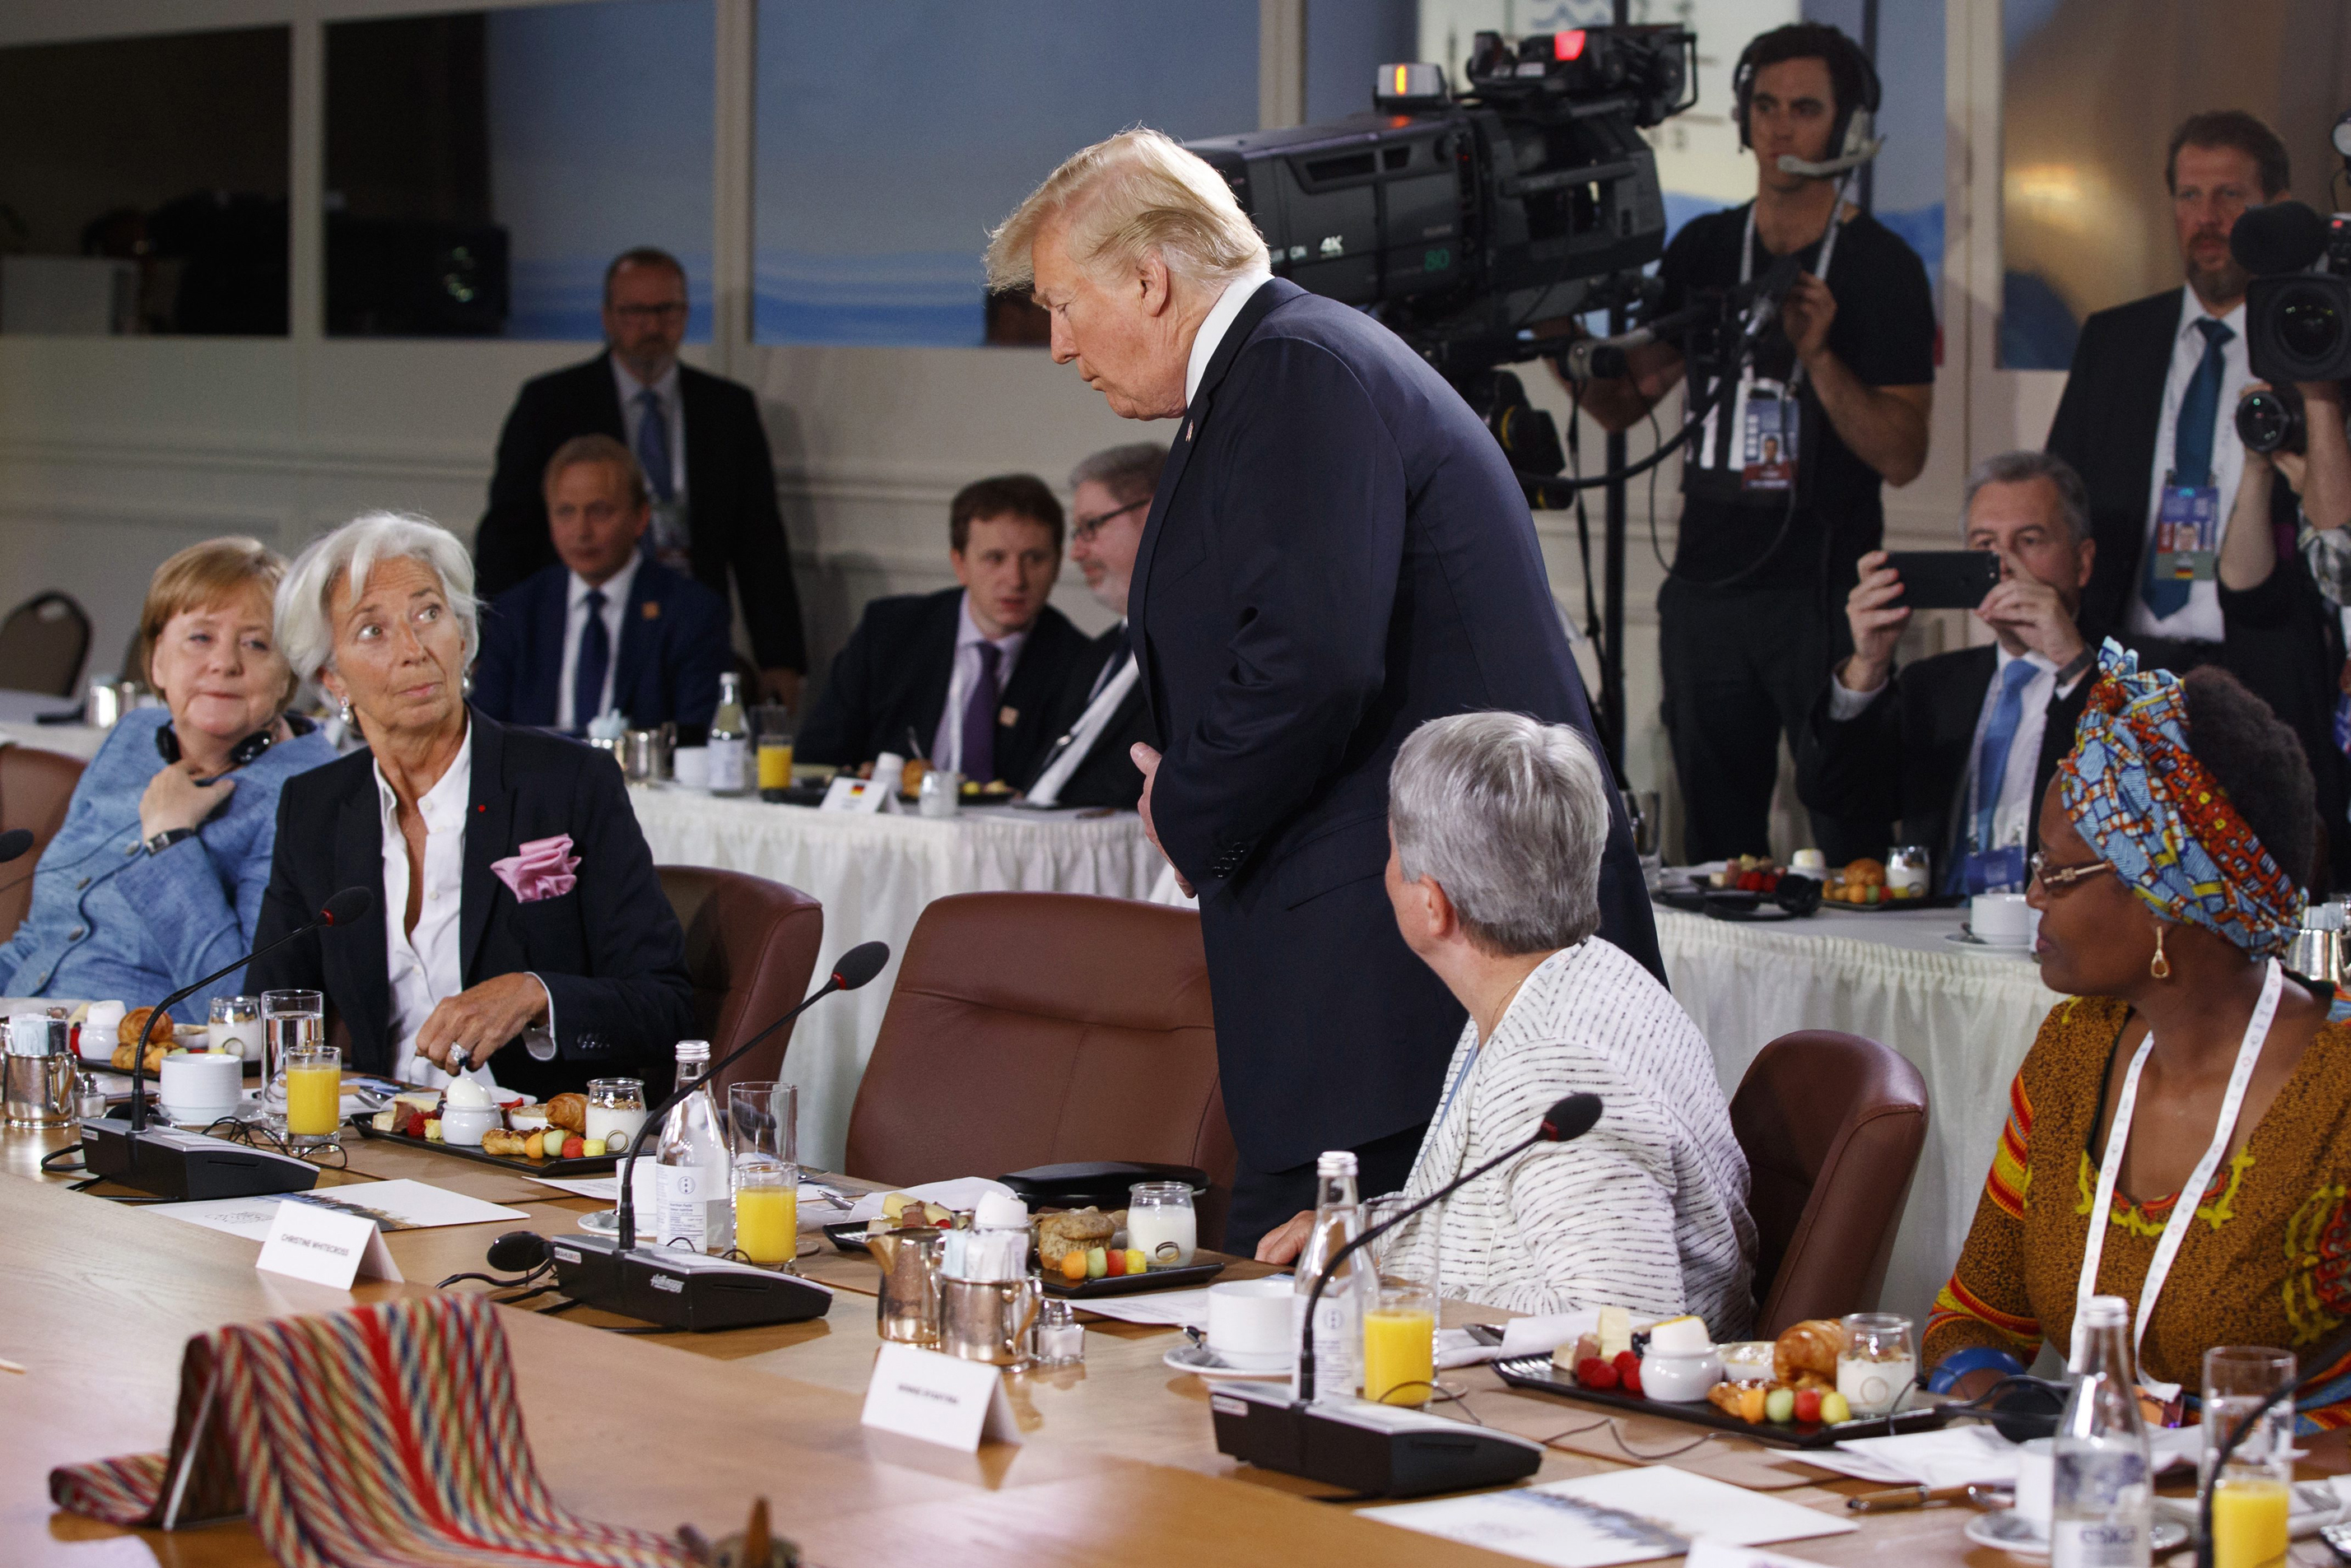 Trump disrupts G7 women's empowerment session by showing up late